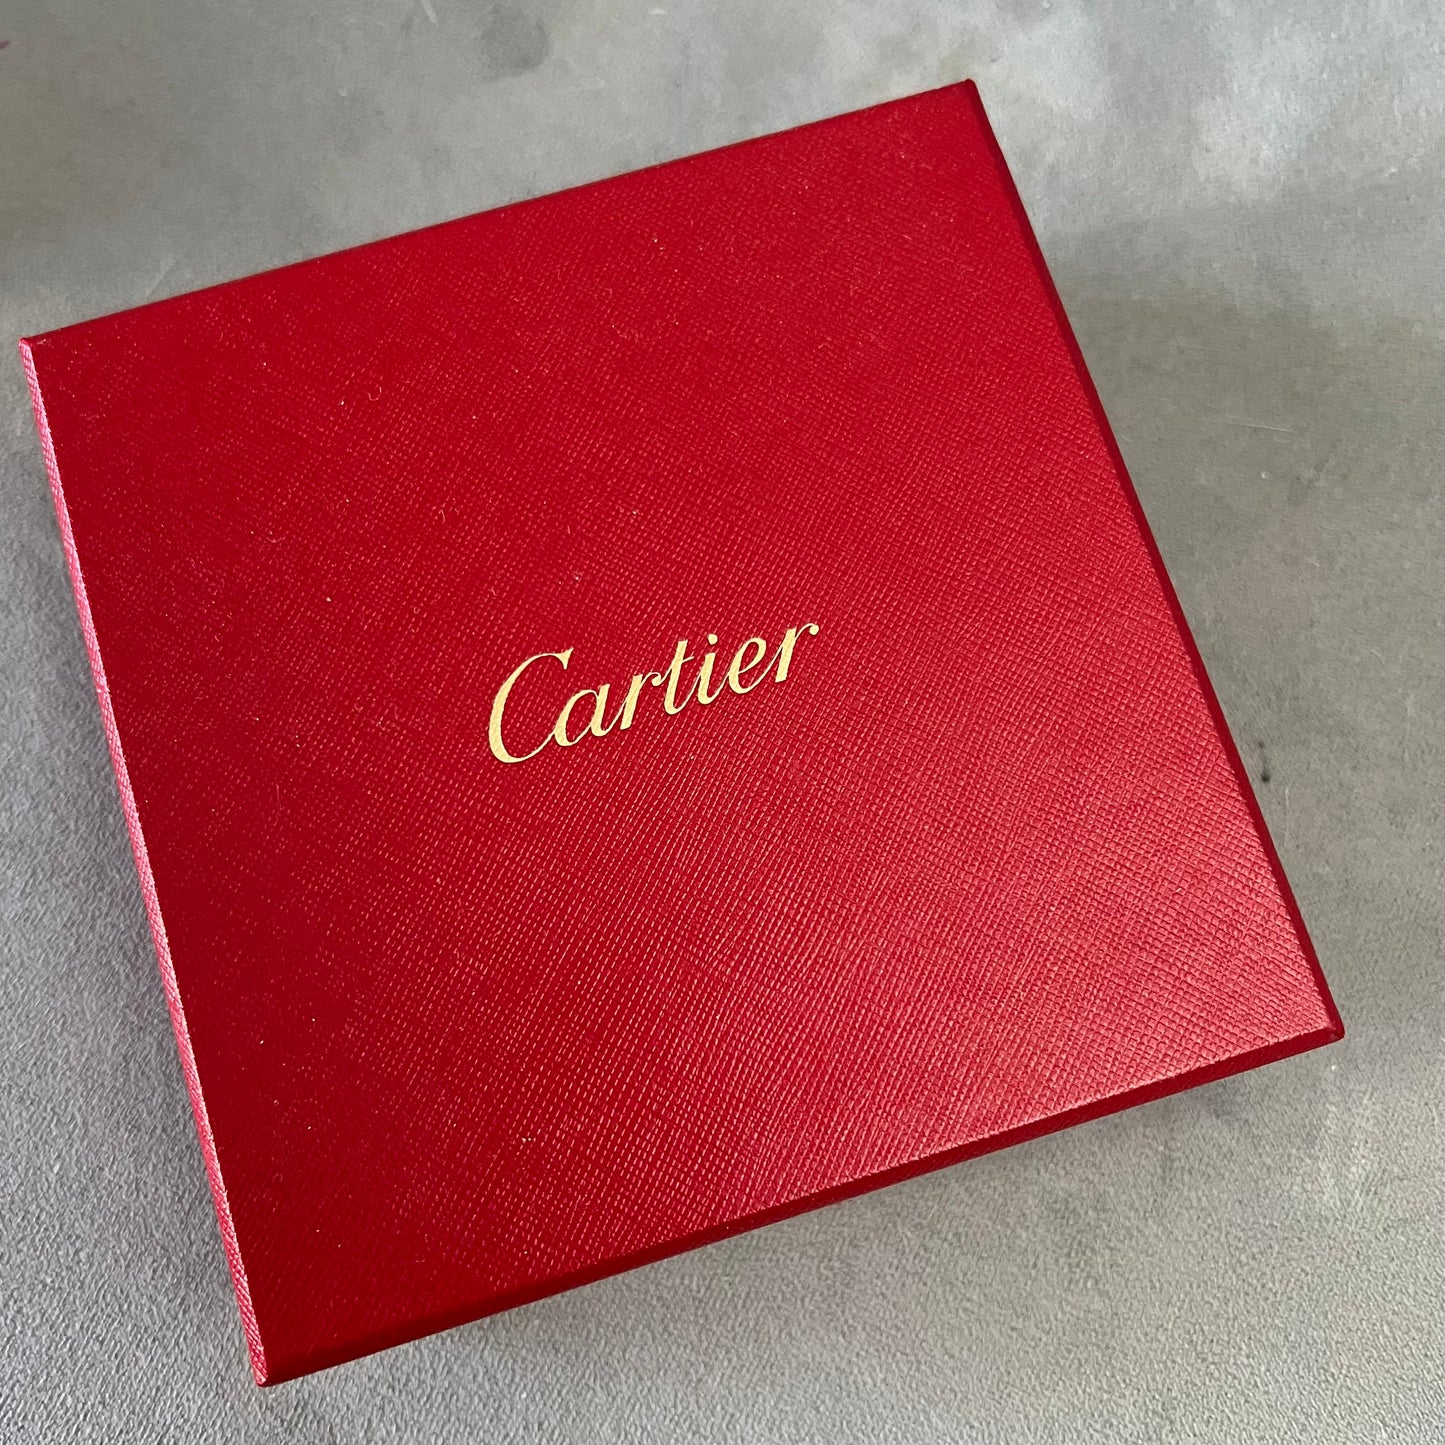 CARTIER Necklace/Chain Box + Outer Box 5.10x5.10x2 inches